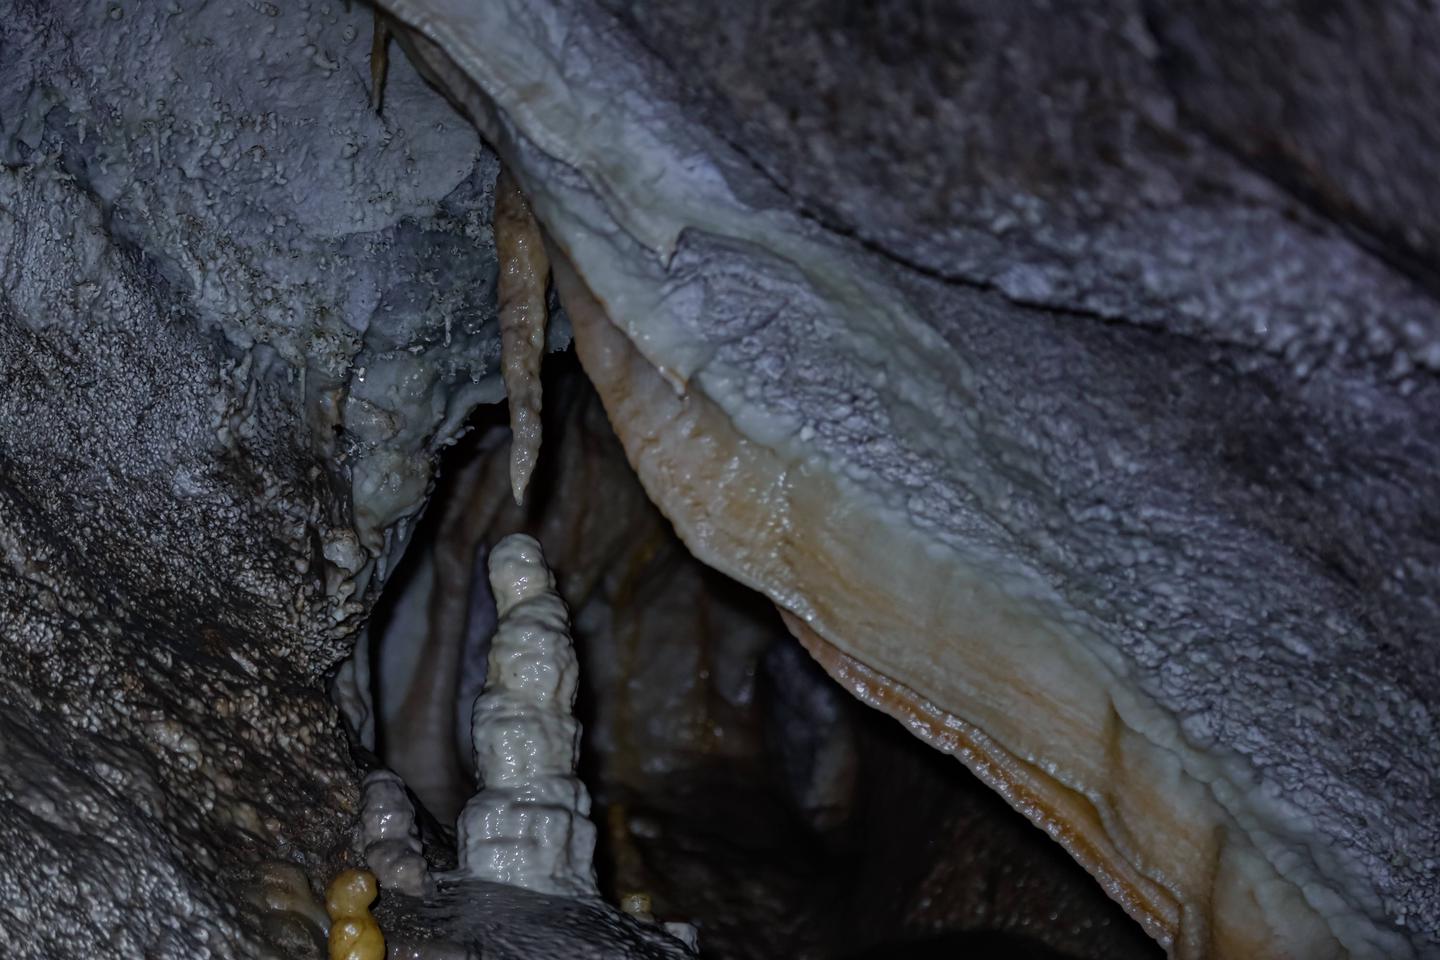 Stalagmite and Stalactite formations growing closer together with every dripStalagmite and Stalactite poised to join together to form a column someday